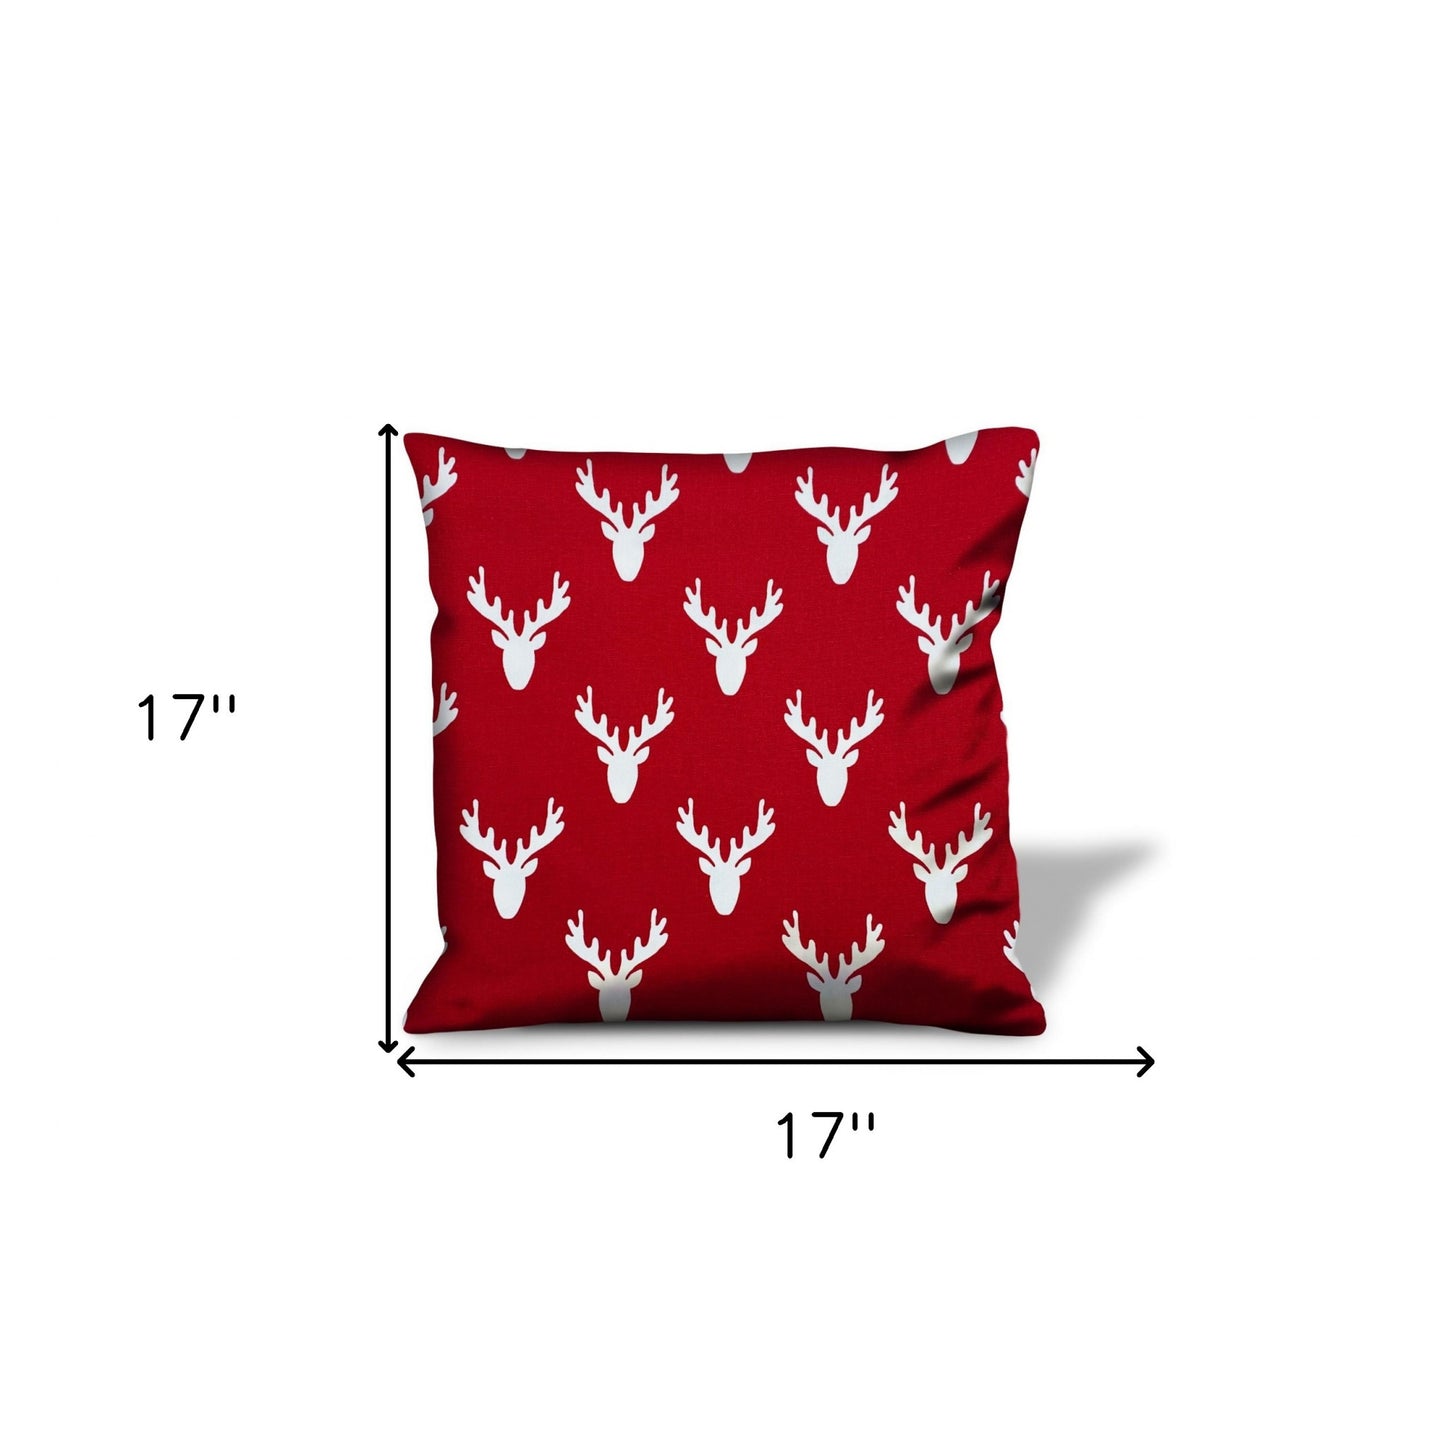 17" X 17" Red Gray And White Reindeer Zippered 100% Cotton Animal Print Throw Pillow Cover